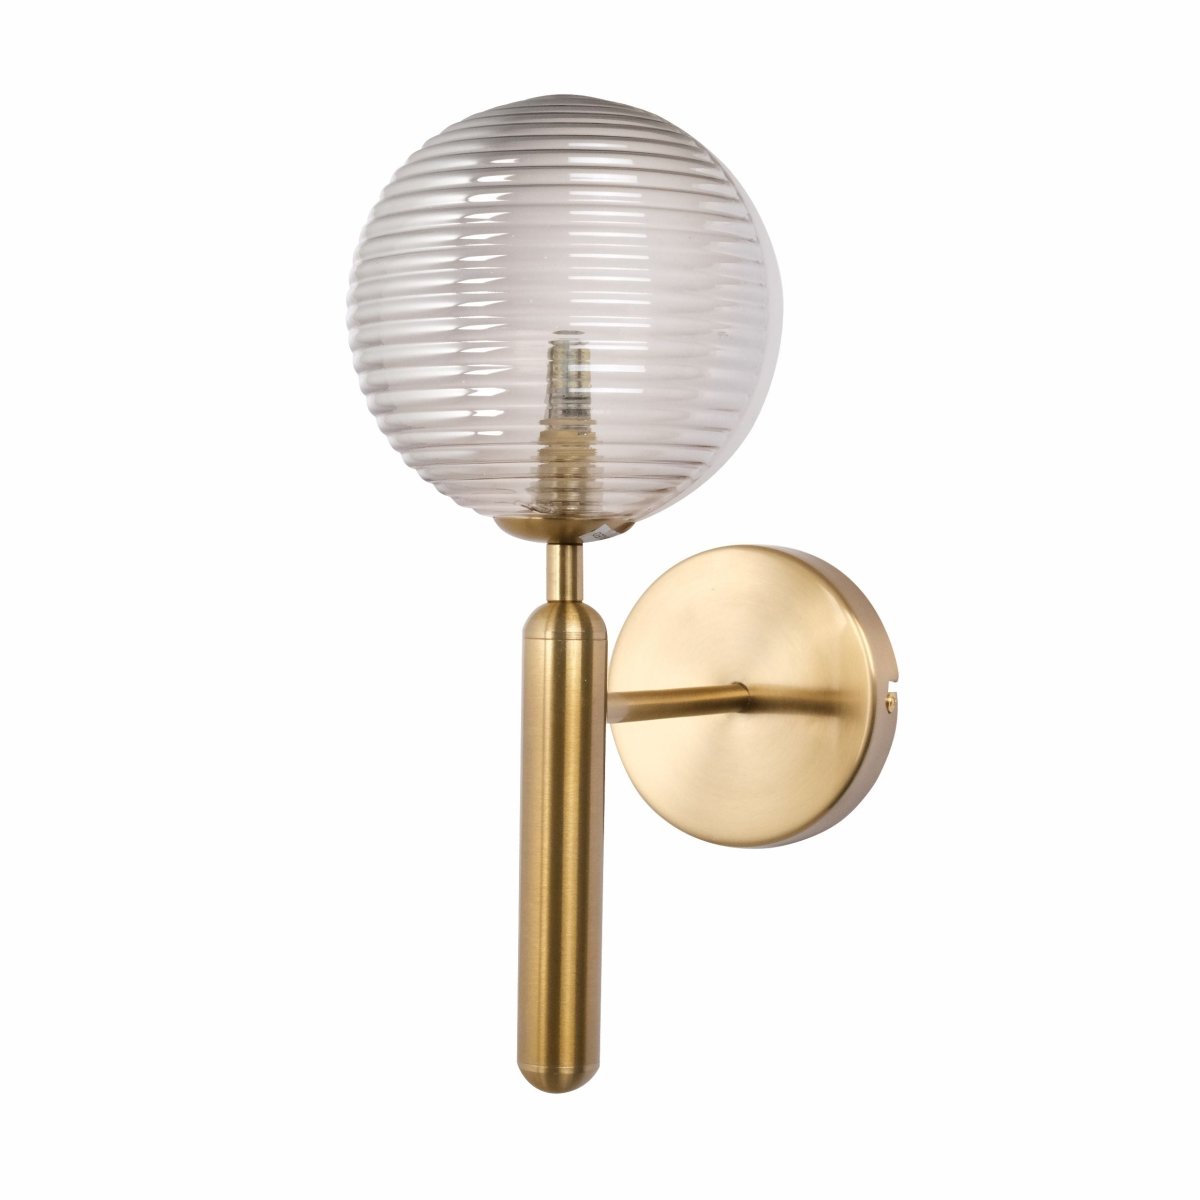 Main image of Striped Glass Gold Metal Wall Light with G9 Fitting | TEKLED 151-19722